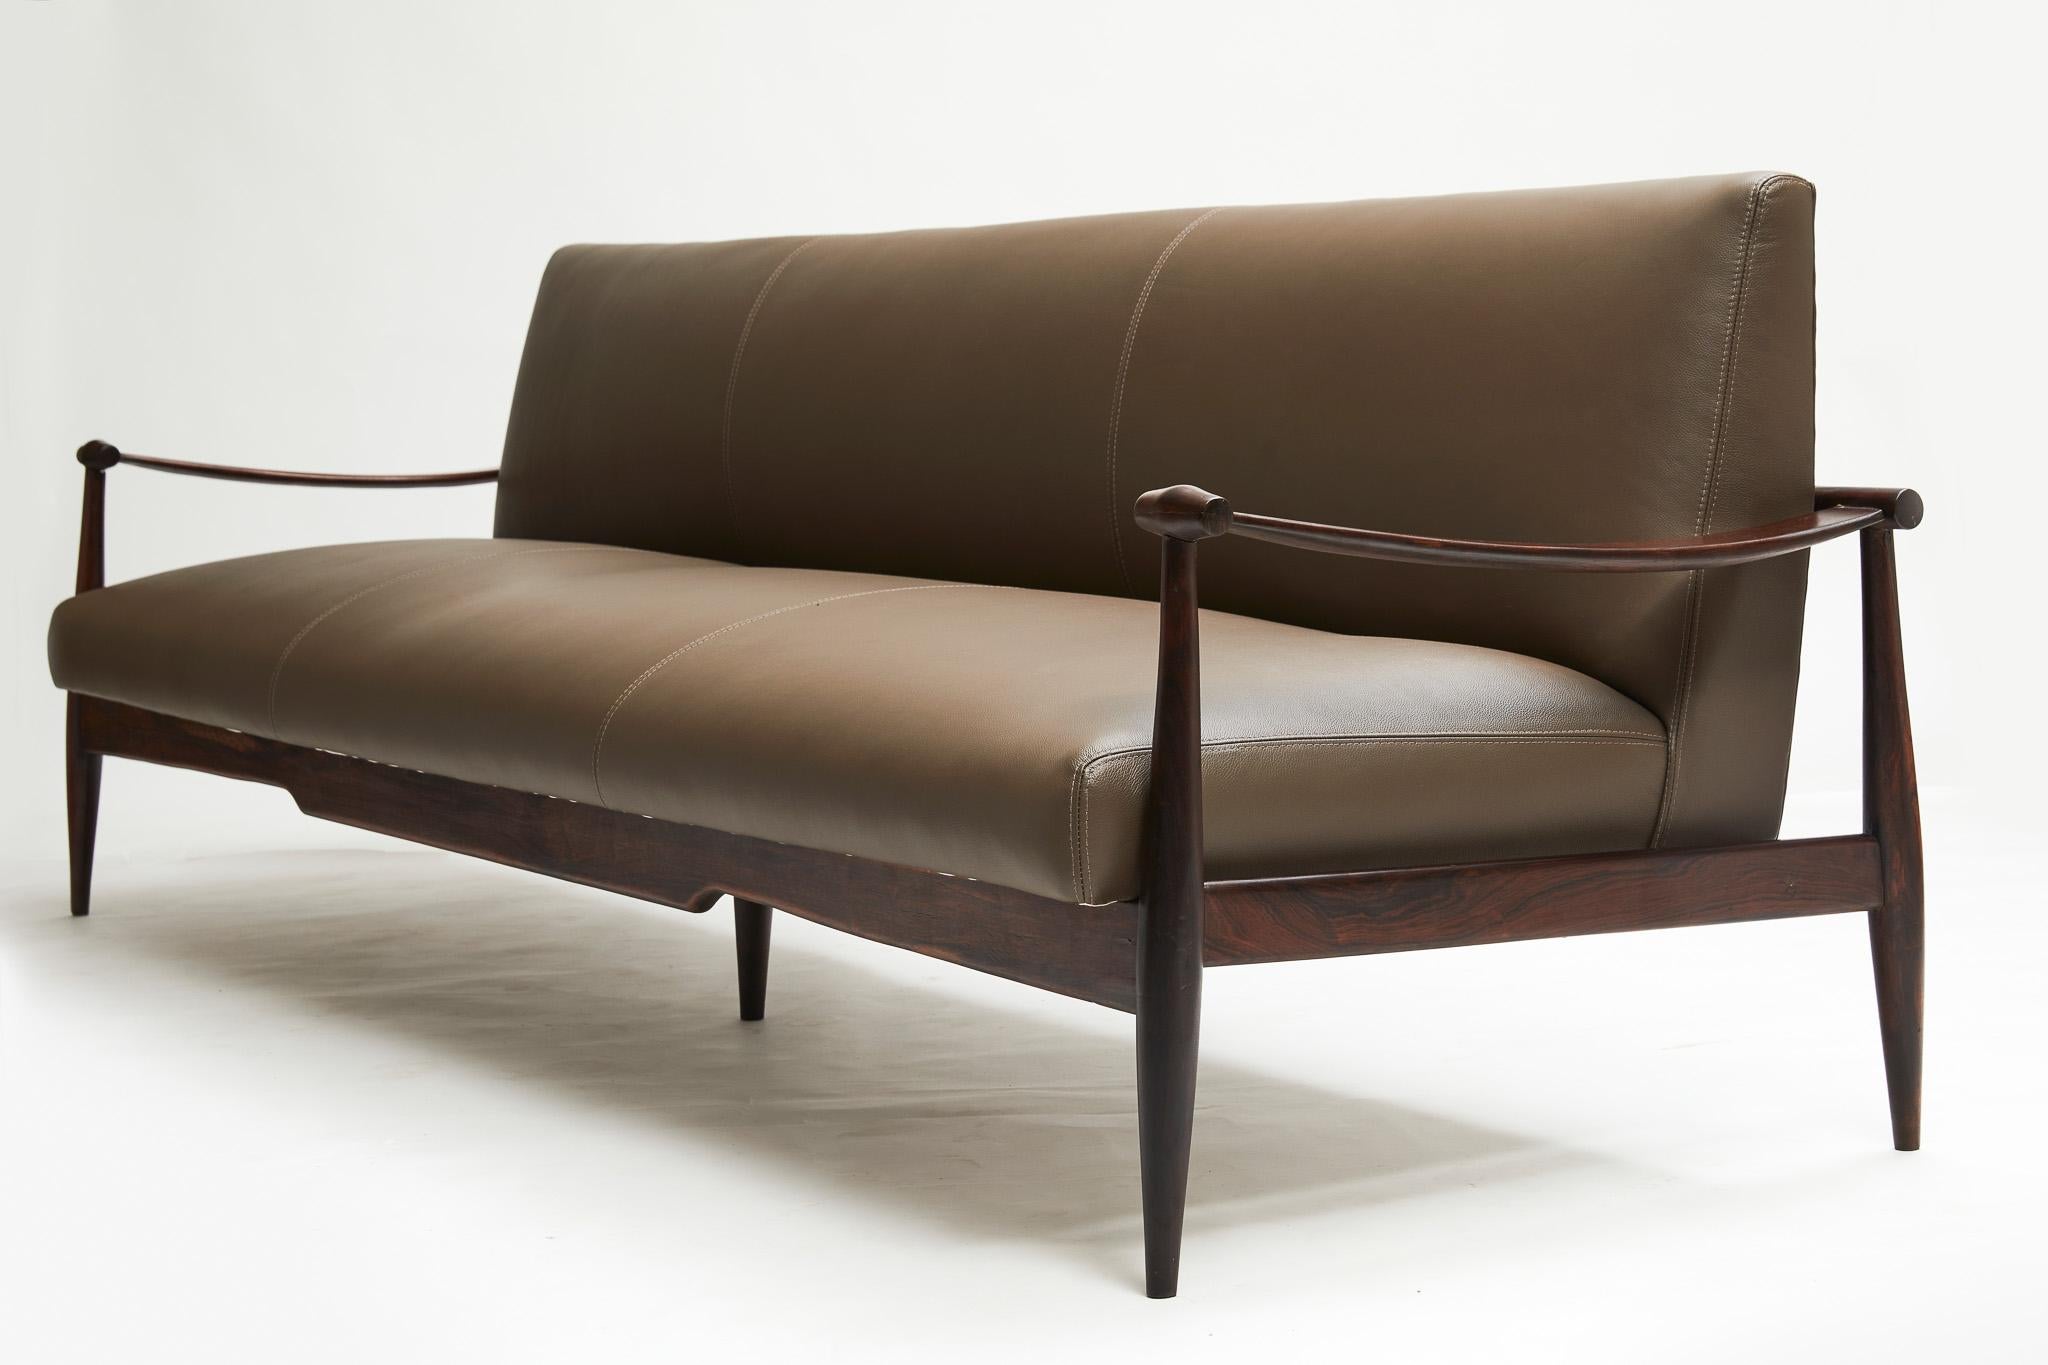 Hand-Carved Brazilian Modern Sofa in Hardwood & Brown Leather by Liceu De Artes 1960 For Sale